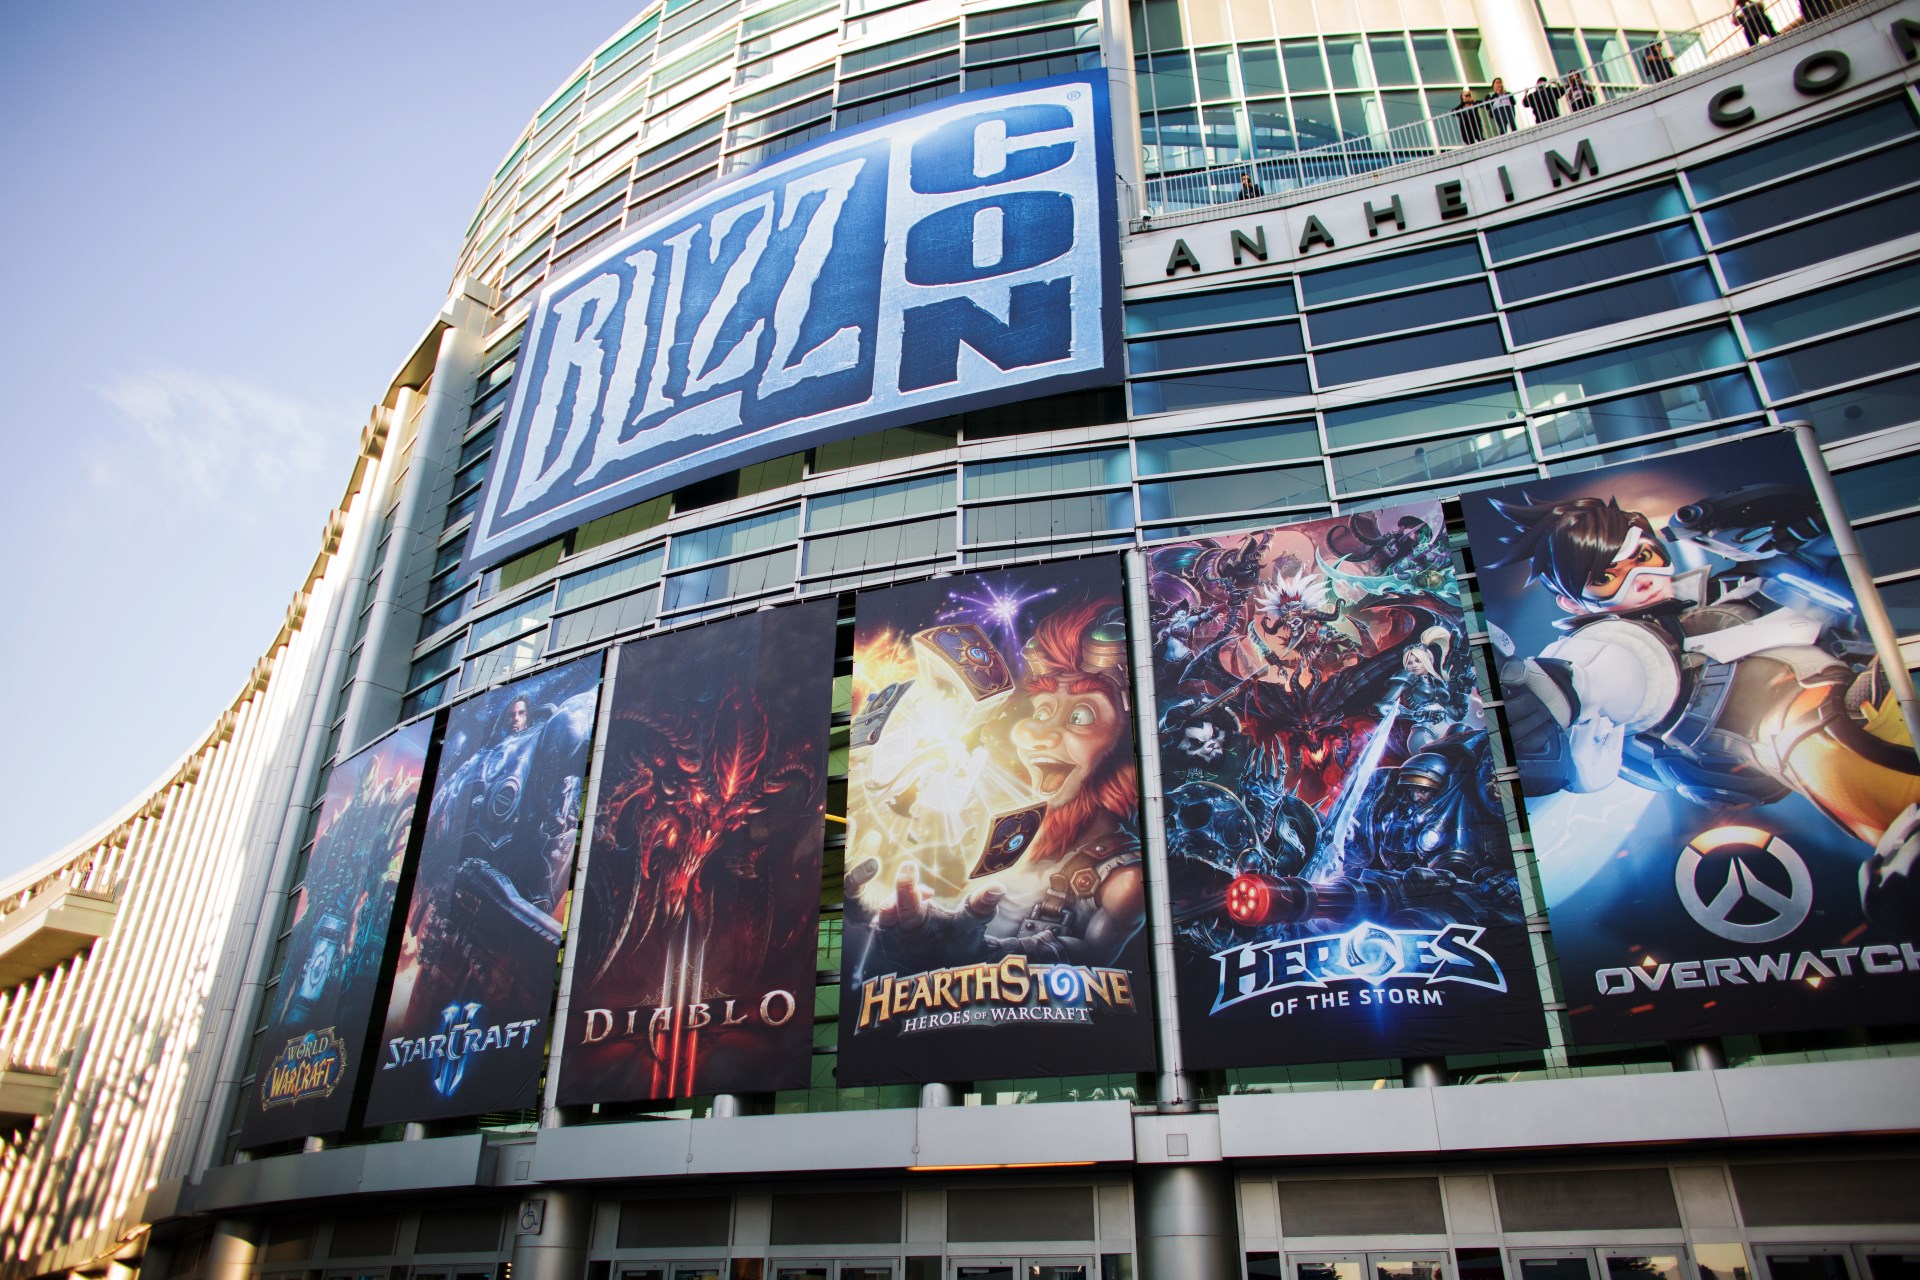 BlizzCon 2017 tickets go on sale in April PC Gamer